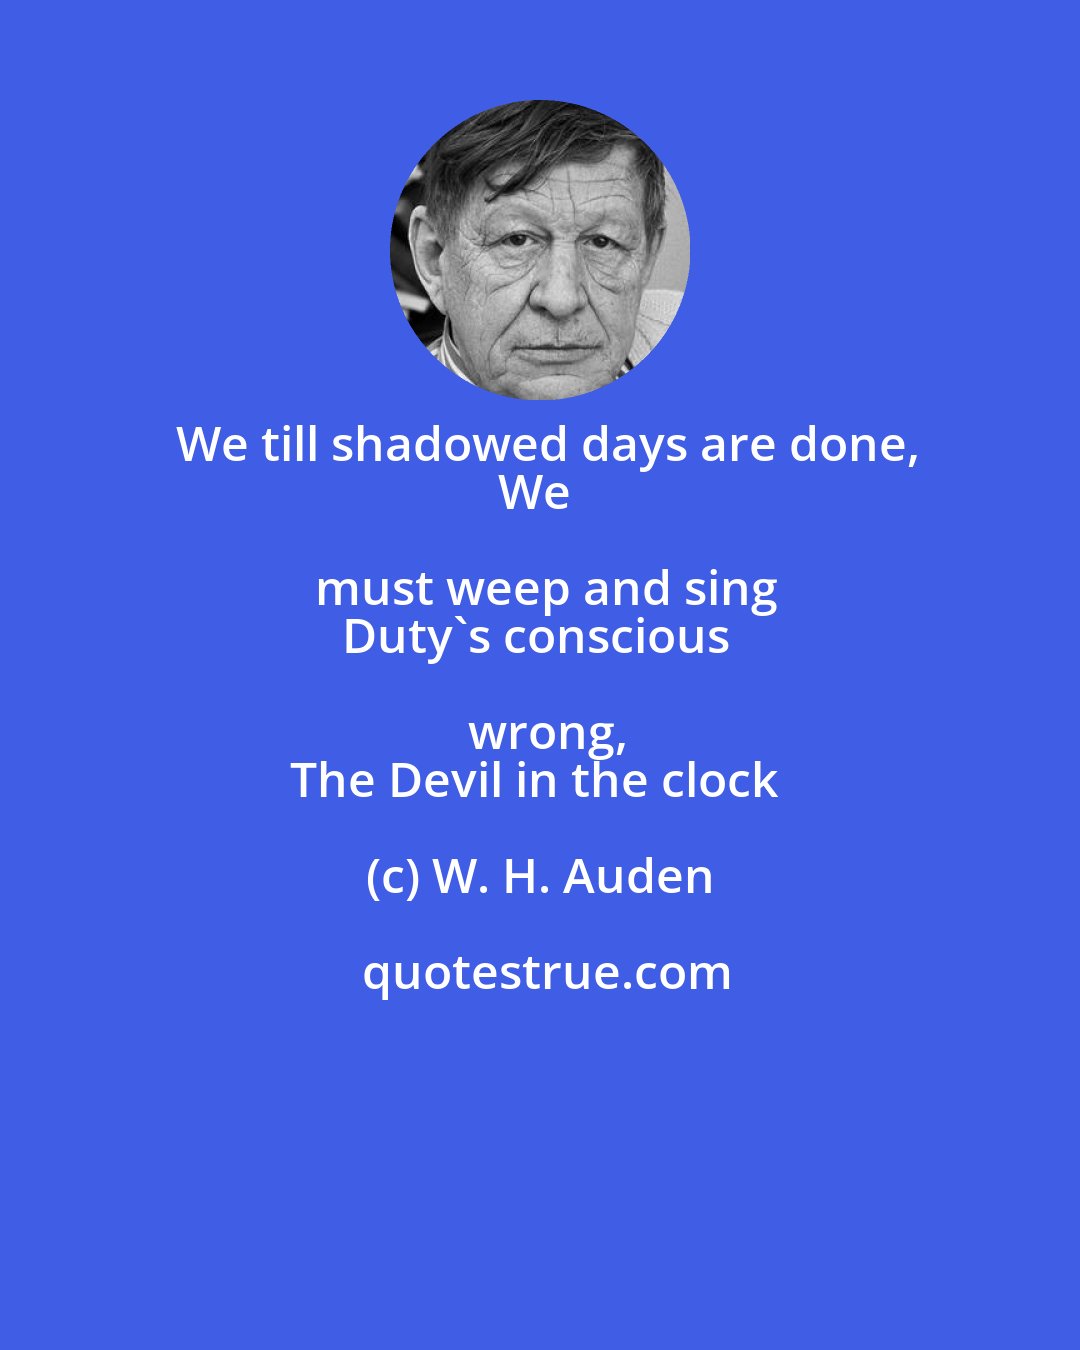 W. H. Auden: We till shadowed days are done,
We must weep and sing
Duty's conscious wrong,
The Devil in the clock